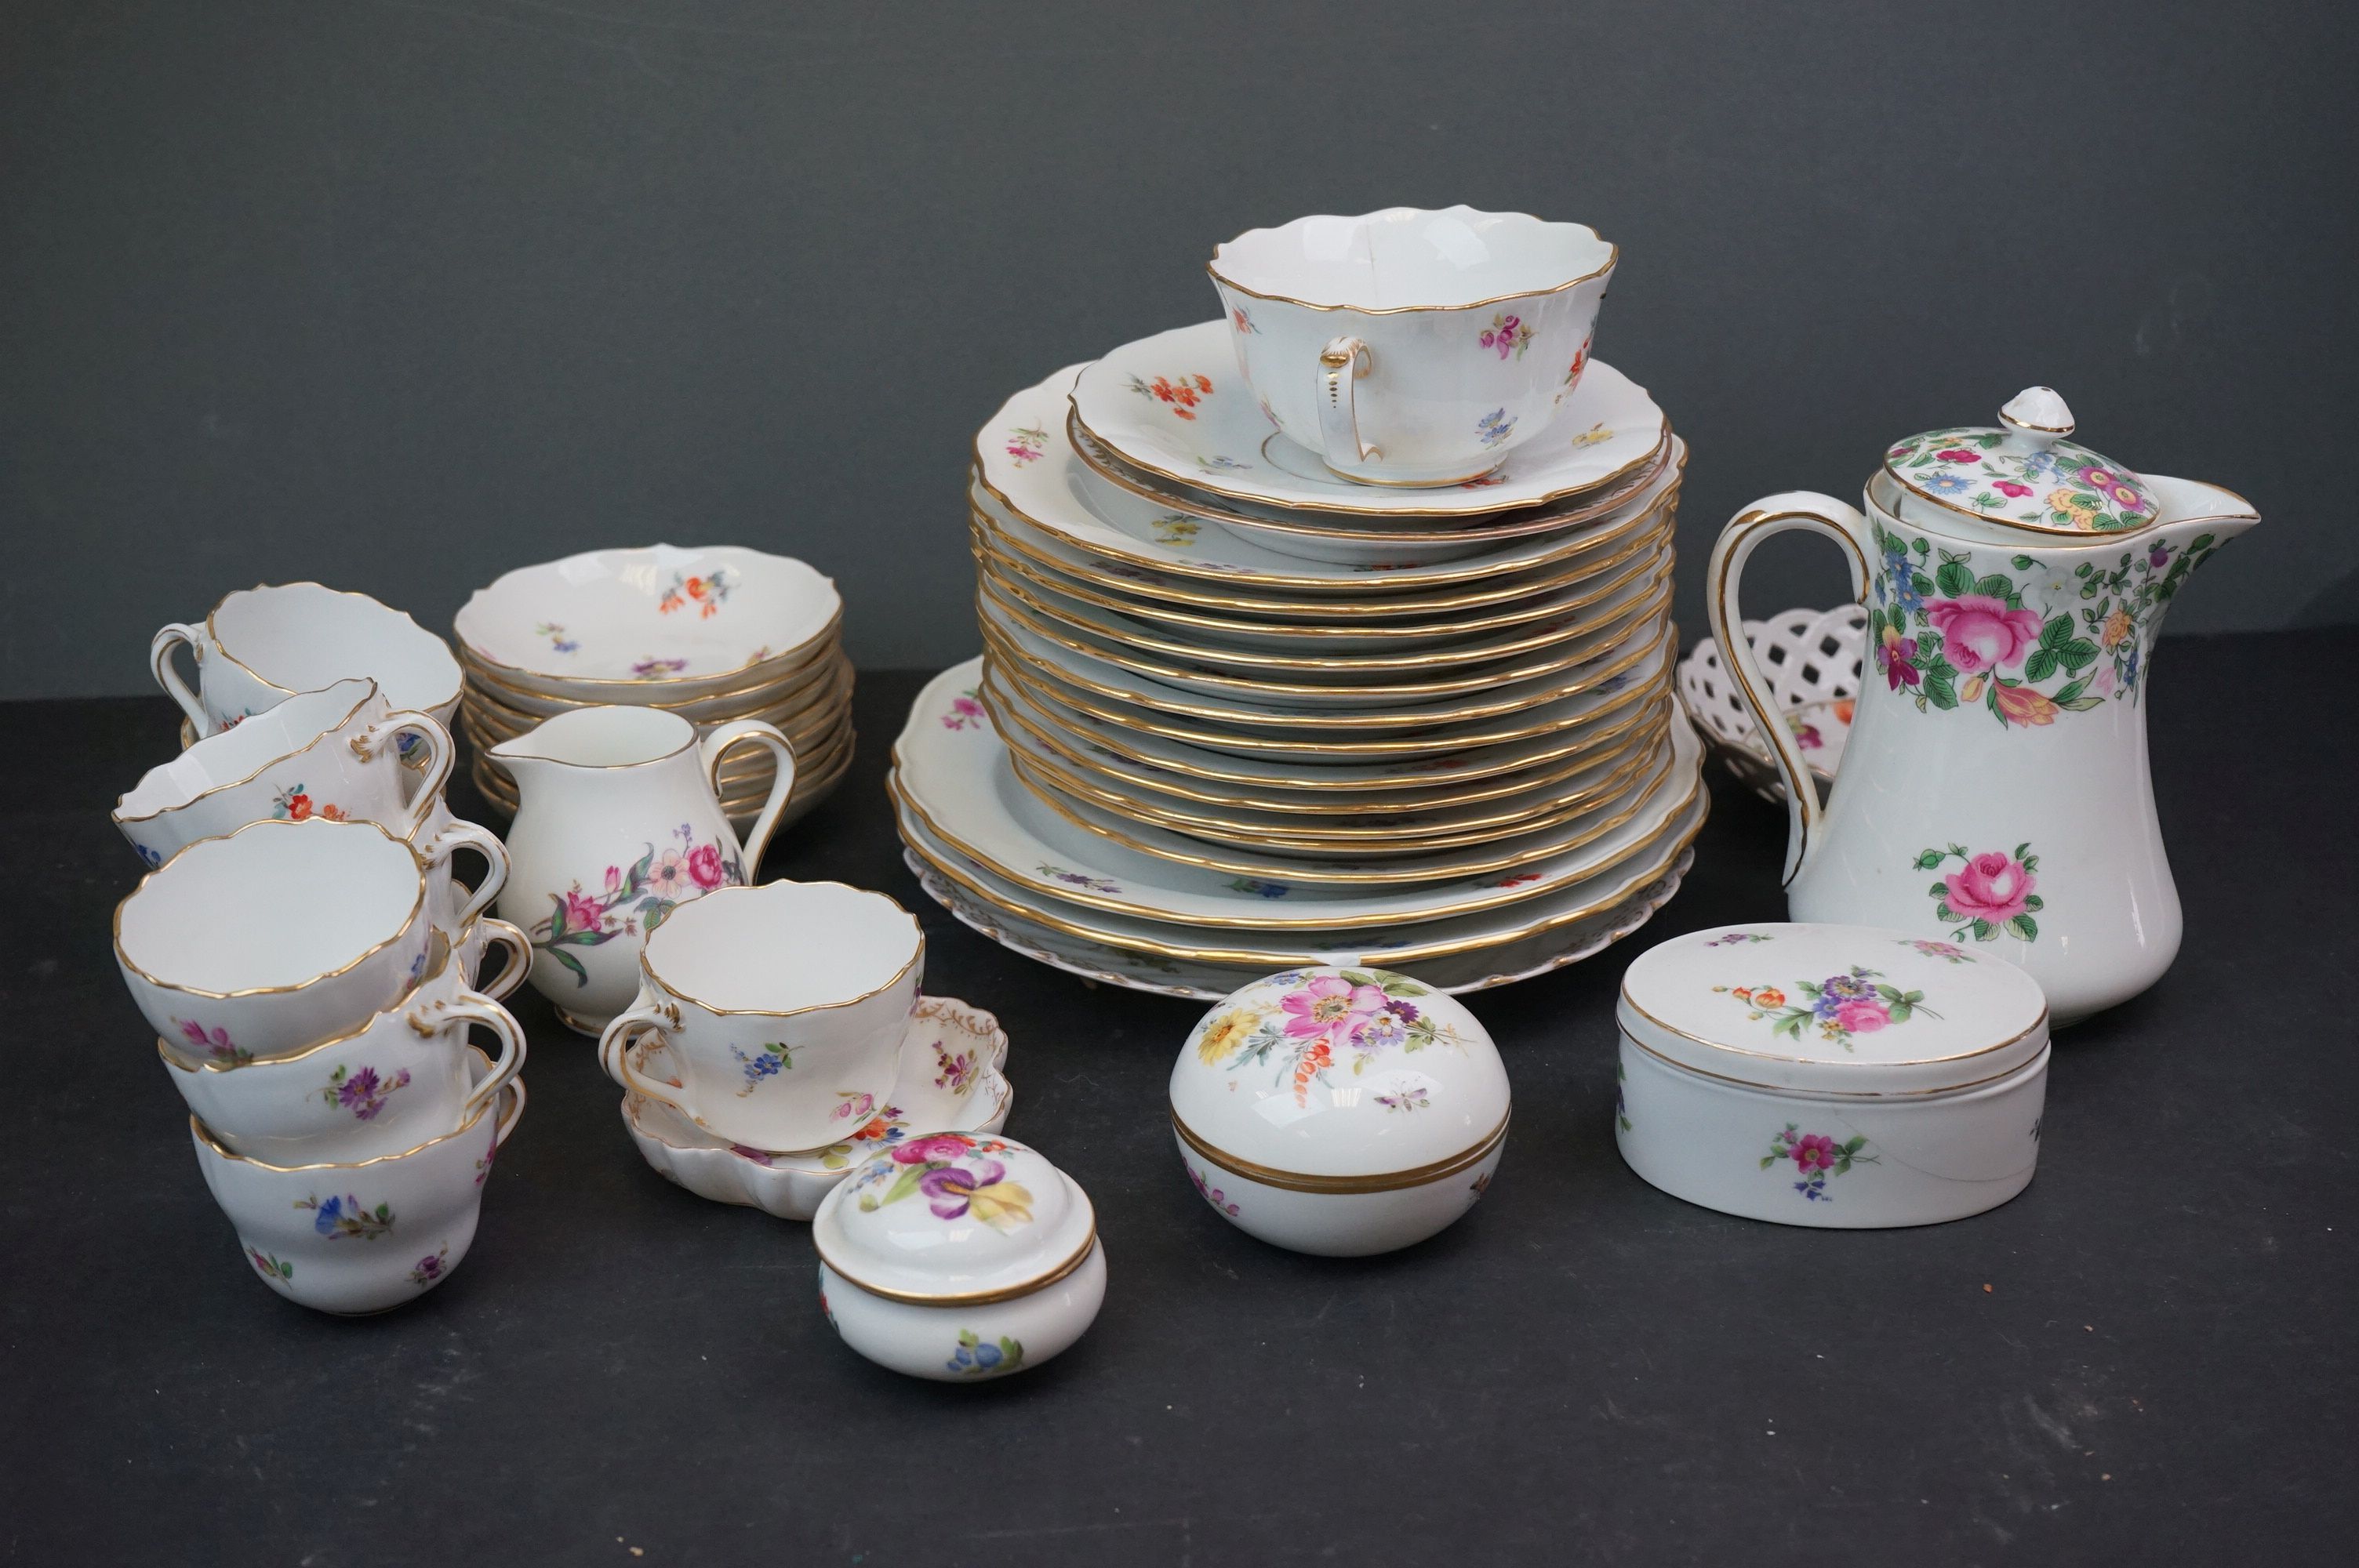 A collection of Meissen and Dresden porcelain to include plates, cups and dishes.